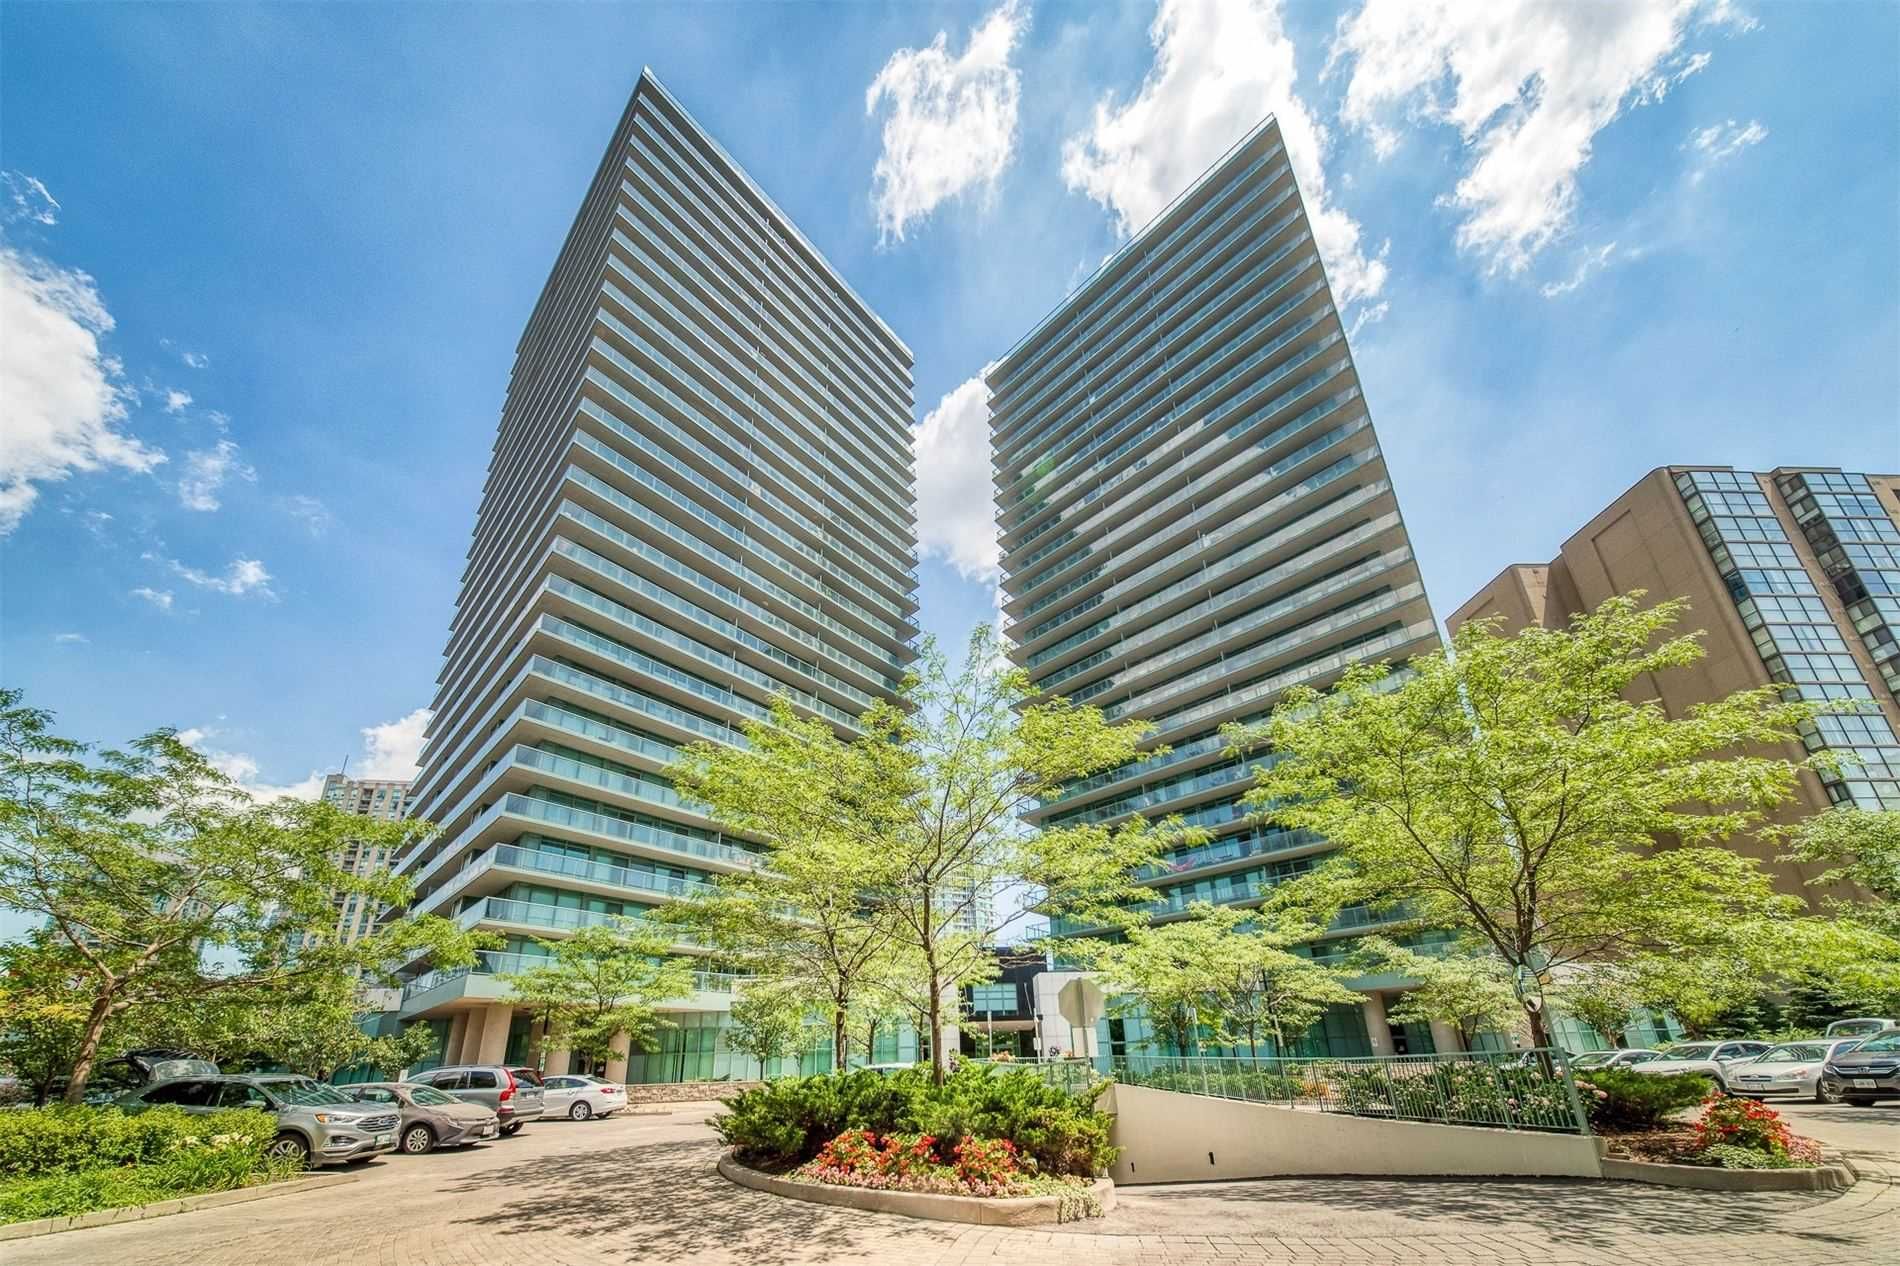 5500 Yonge St. This condo at Pulse Condos is located in  North York, Toronto - image #1 of 2 by Strata.ca